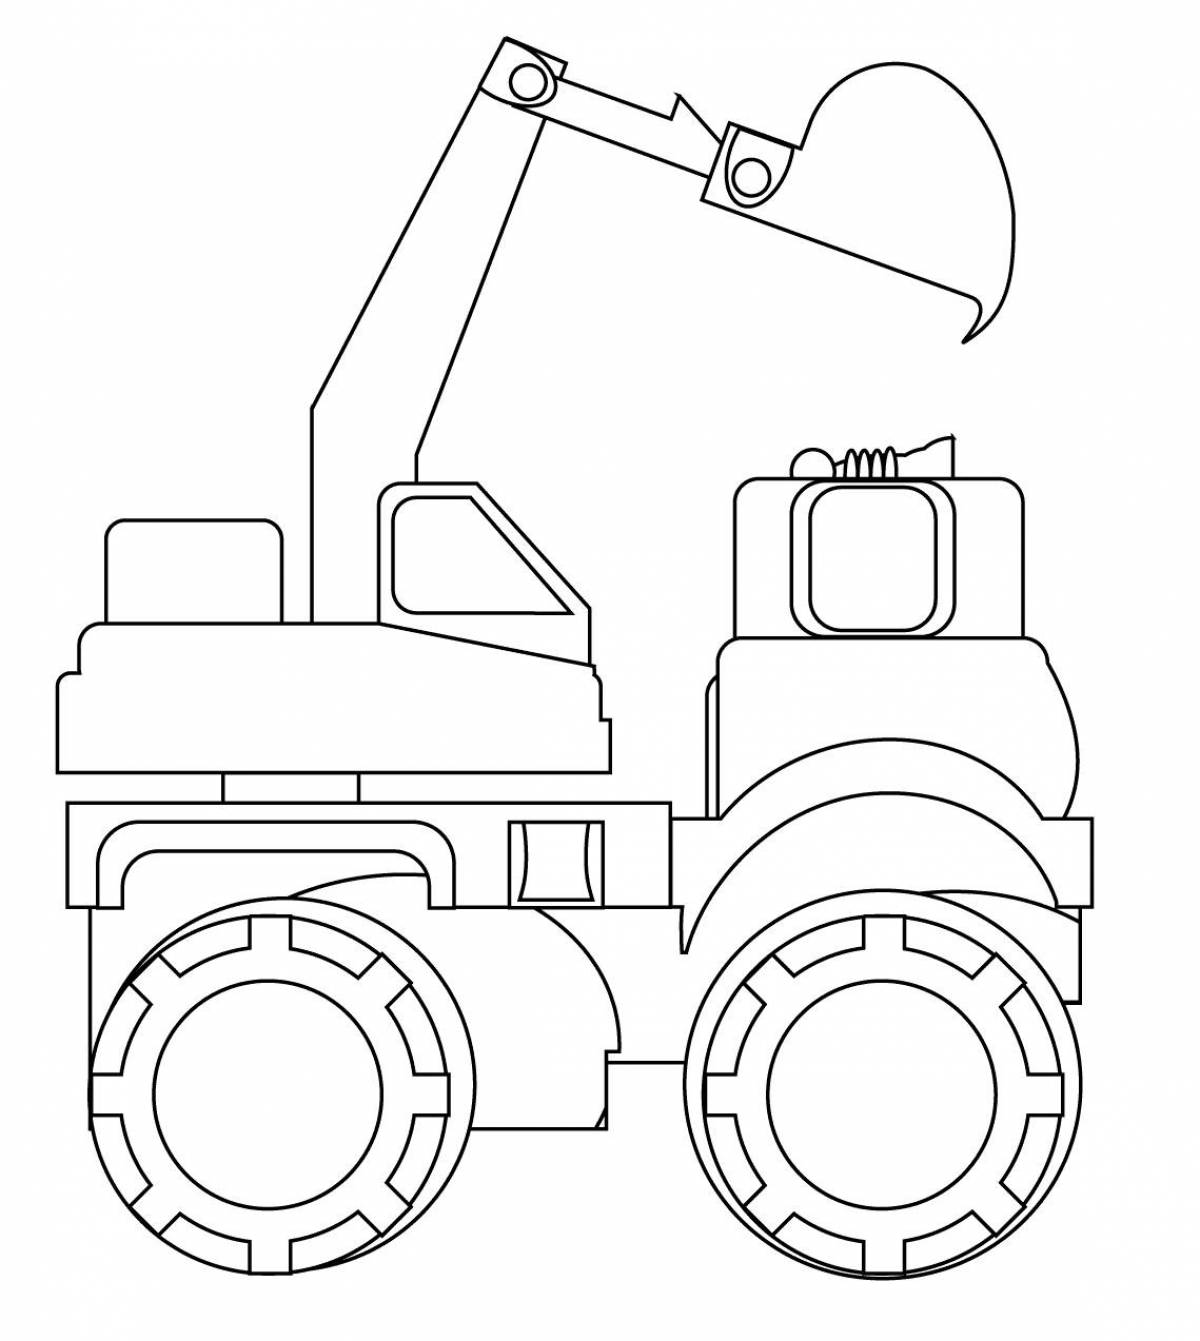 Colouring awesome construction vehicles